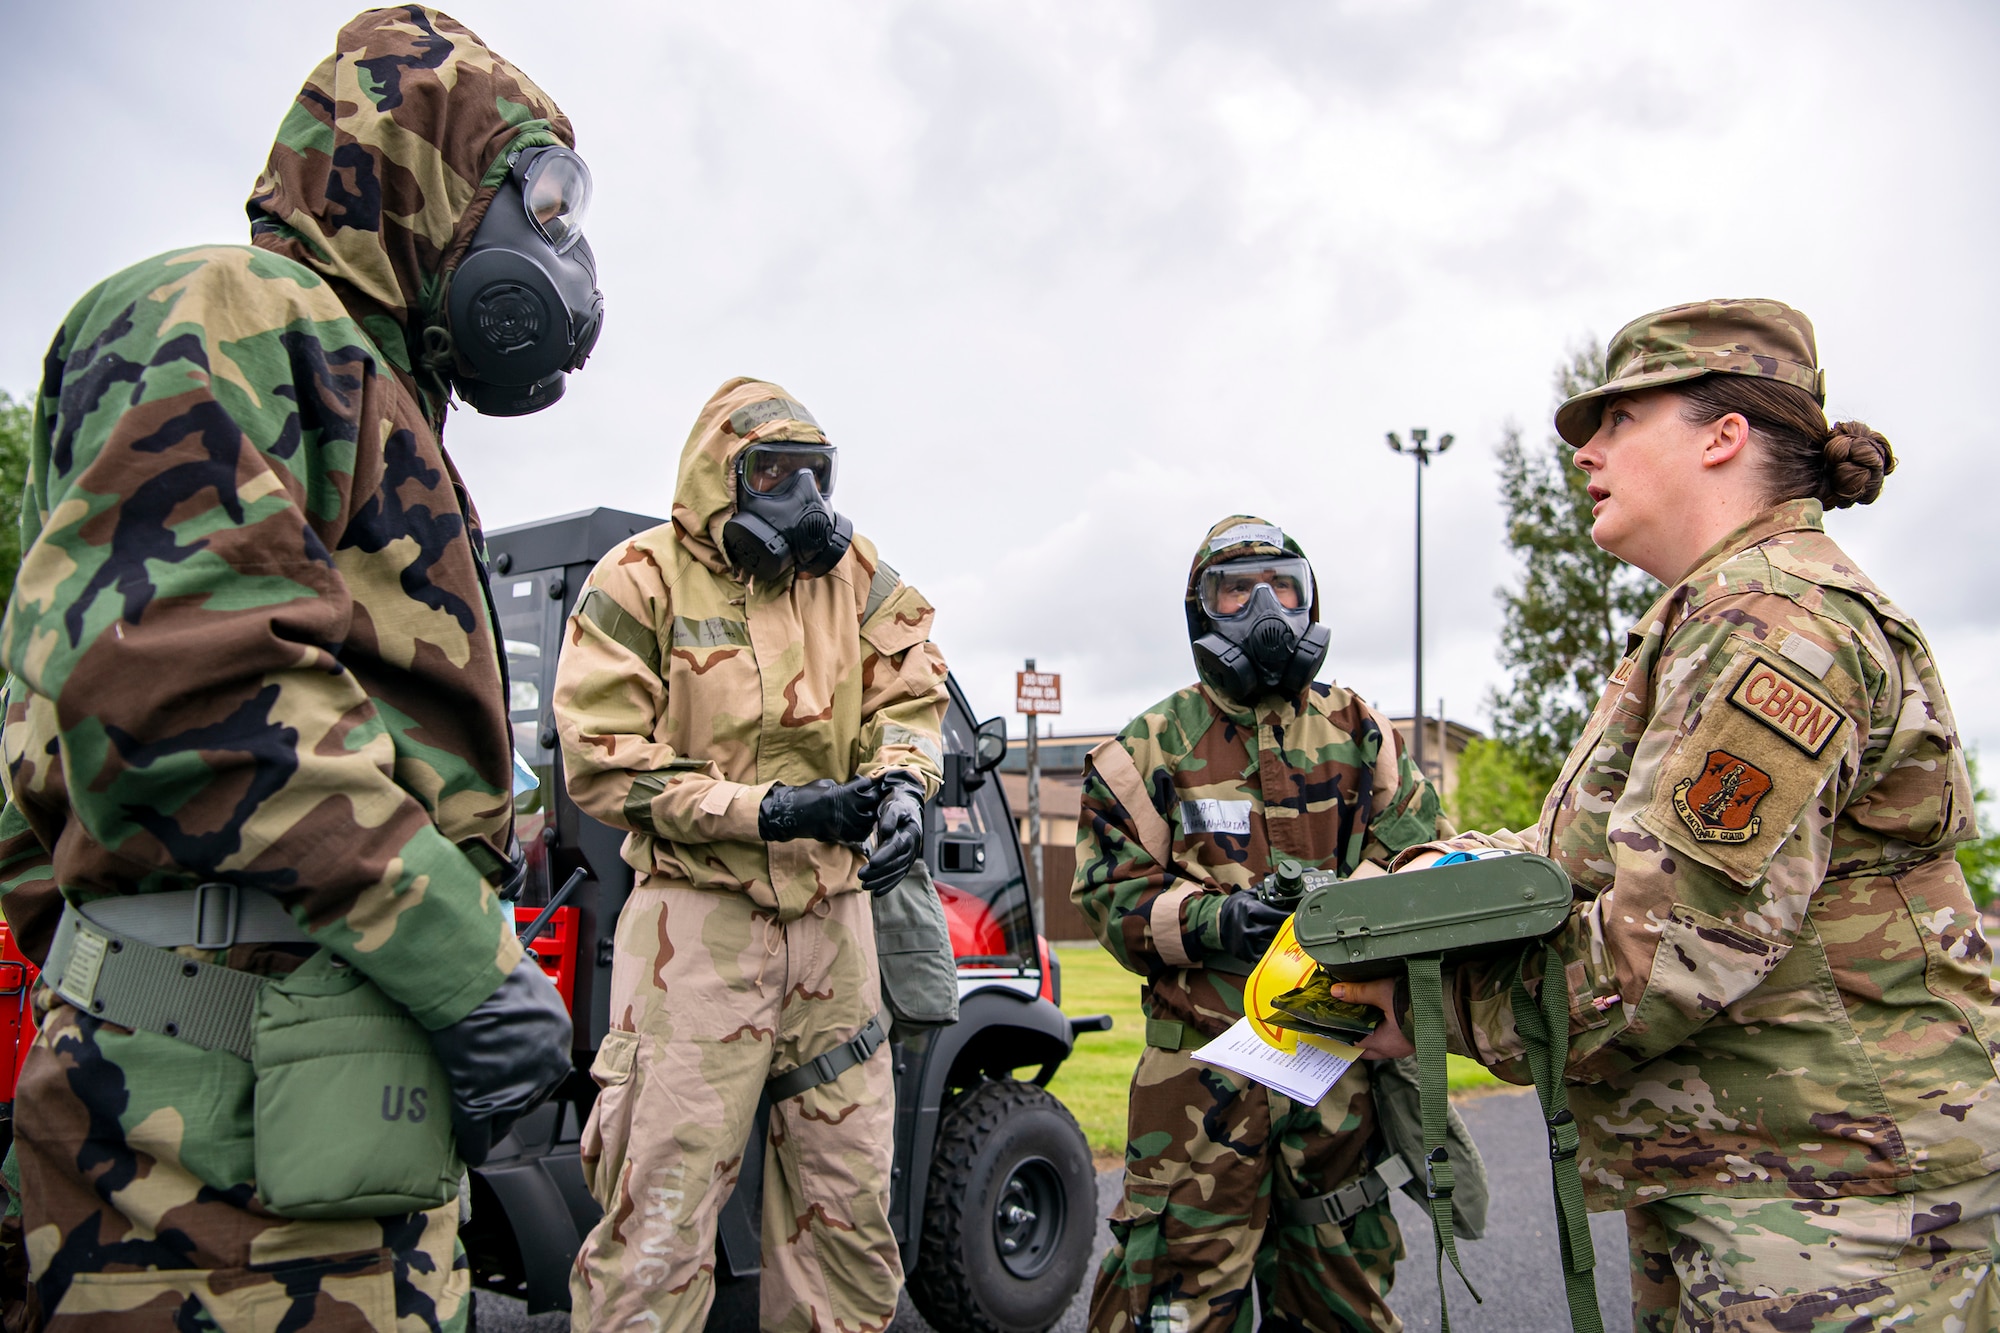 Master Sgt. Kate Menges, 423d Civil Engineer Squadron emergency management craftsman, briefs airmen prior to an exercise at RAF Alconbury, England, May 19, 2022. The exercise was geared towards training Airmen on how to properly control and examine a contaminated area after a simulated chemical attack while in Mission Oriented Protective Posture Gear. (U.S. Air Force photo by Staff Sgt. Eugene Oliver)